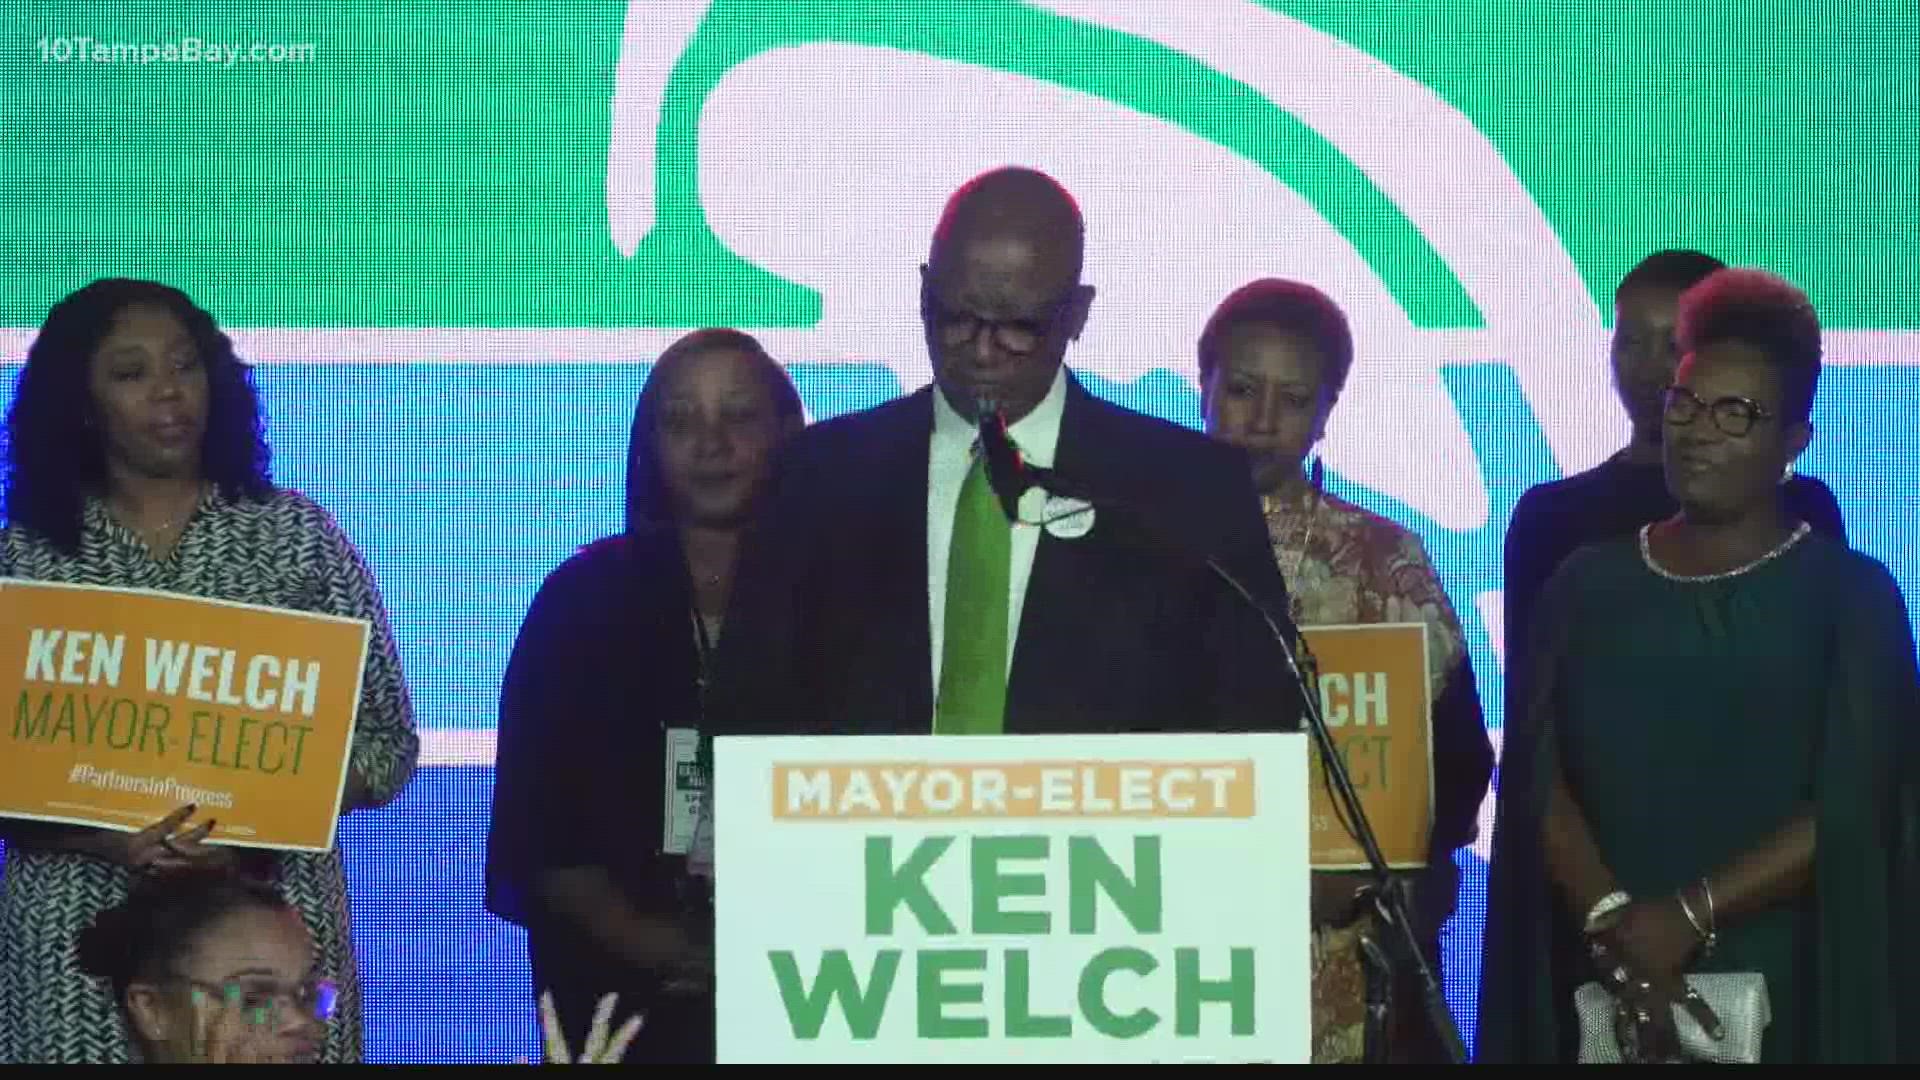 The people of St. Petersburg have made their voices heard in electing former Pinellas County Commissioner Ken Welch as their next mayor.